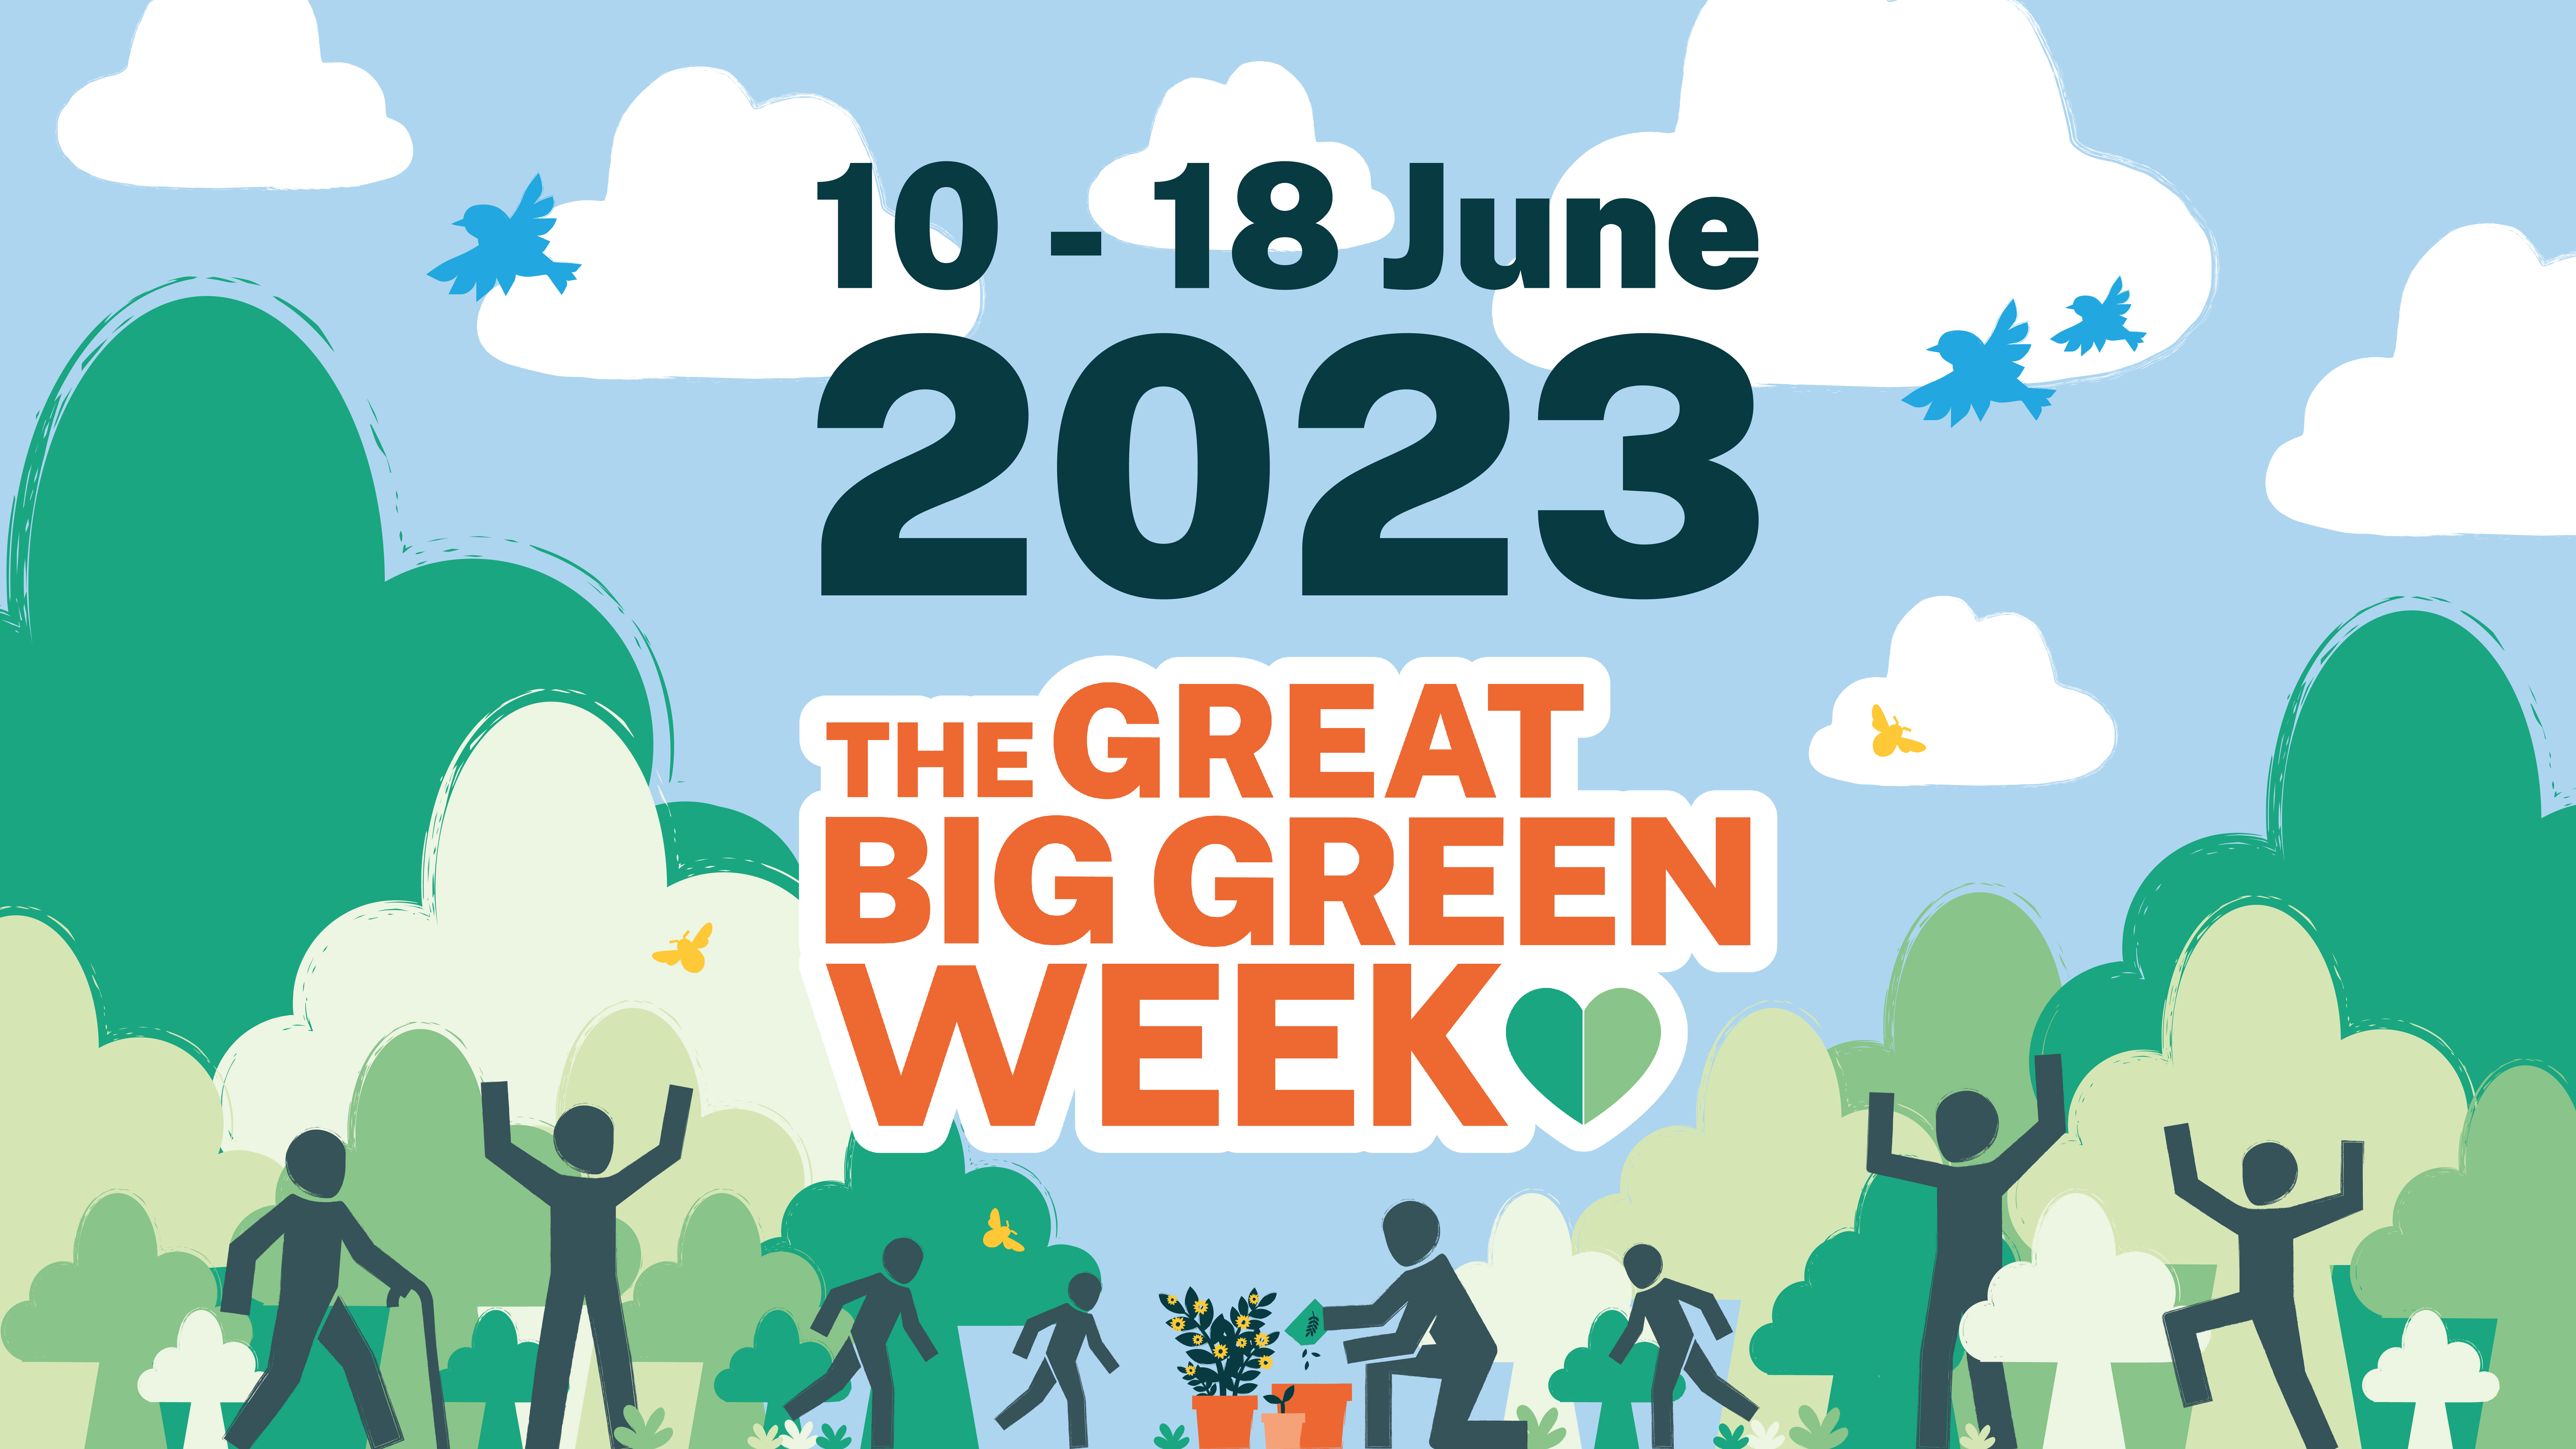 Celebrating the great big green power of community in Warwickshire